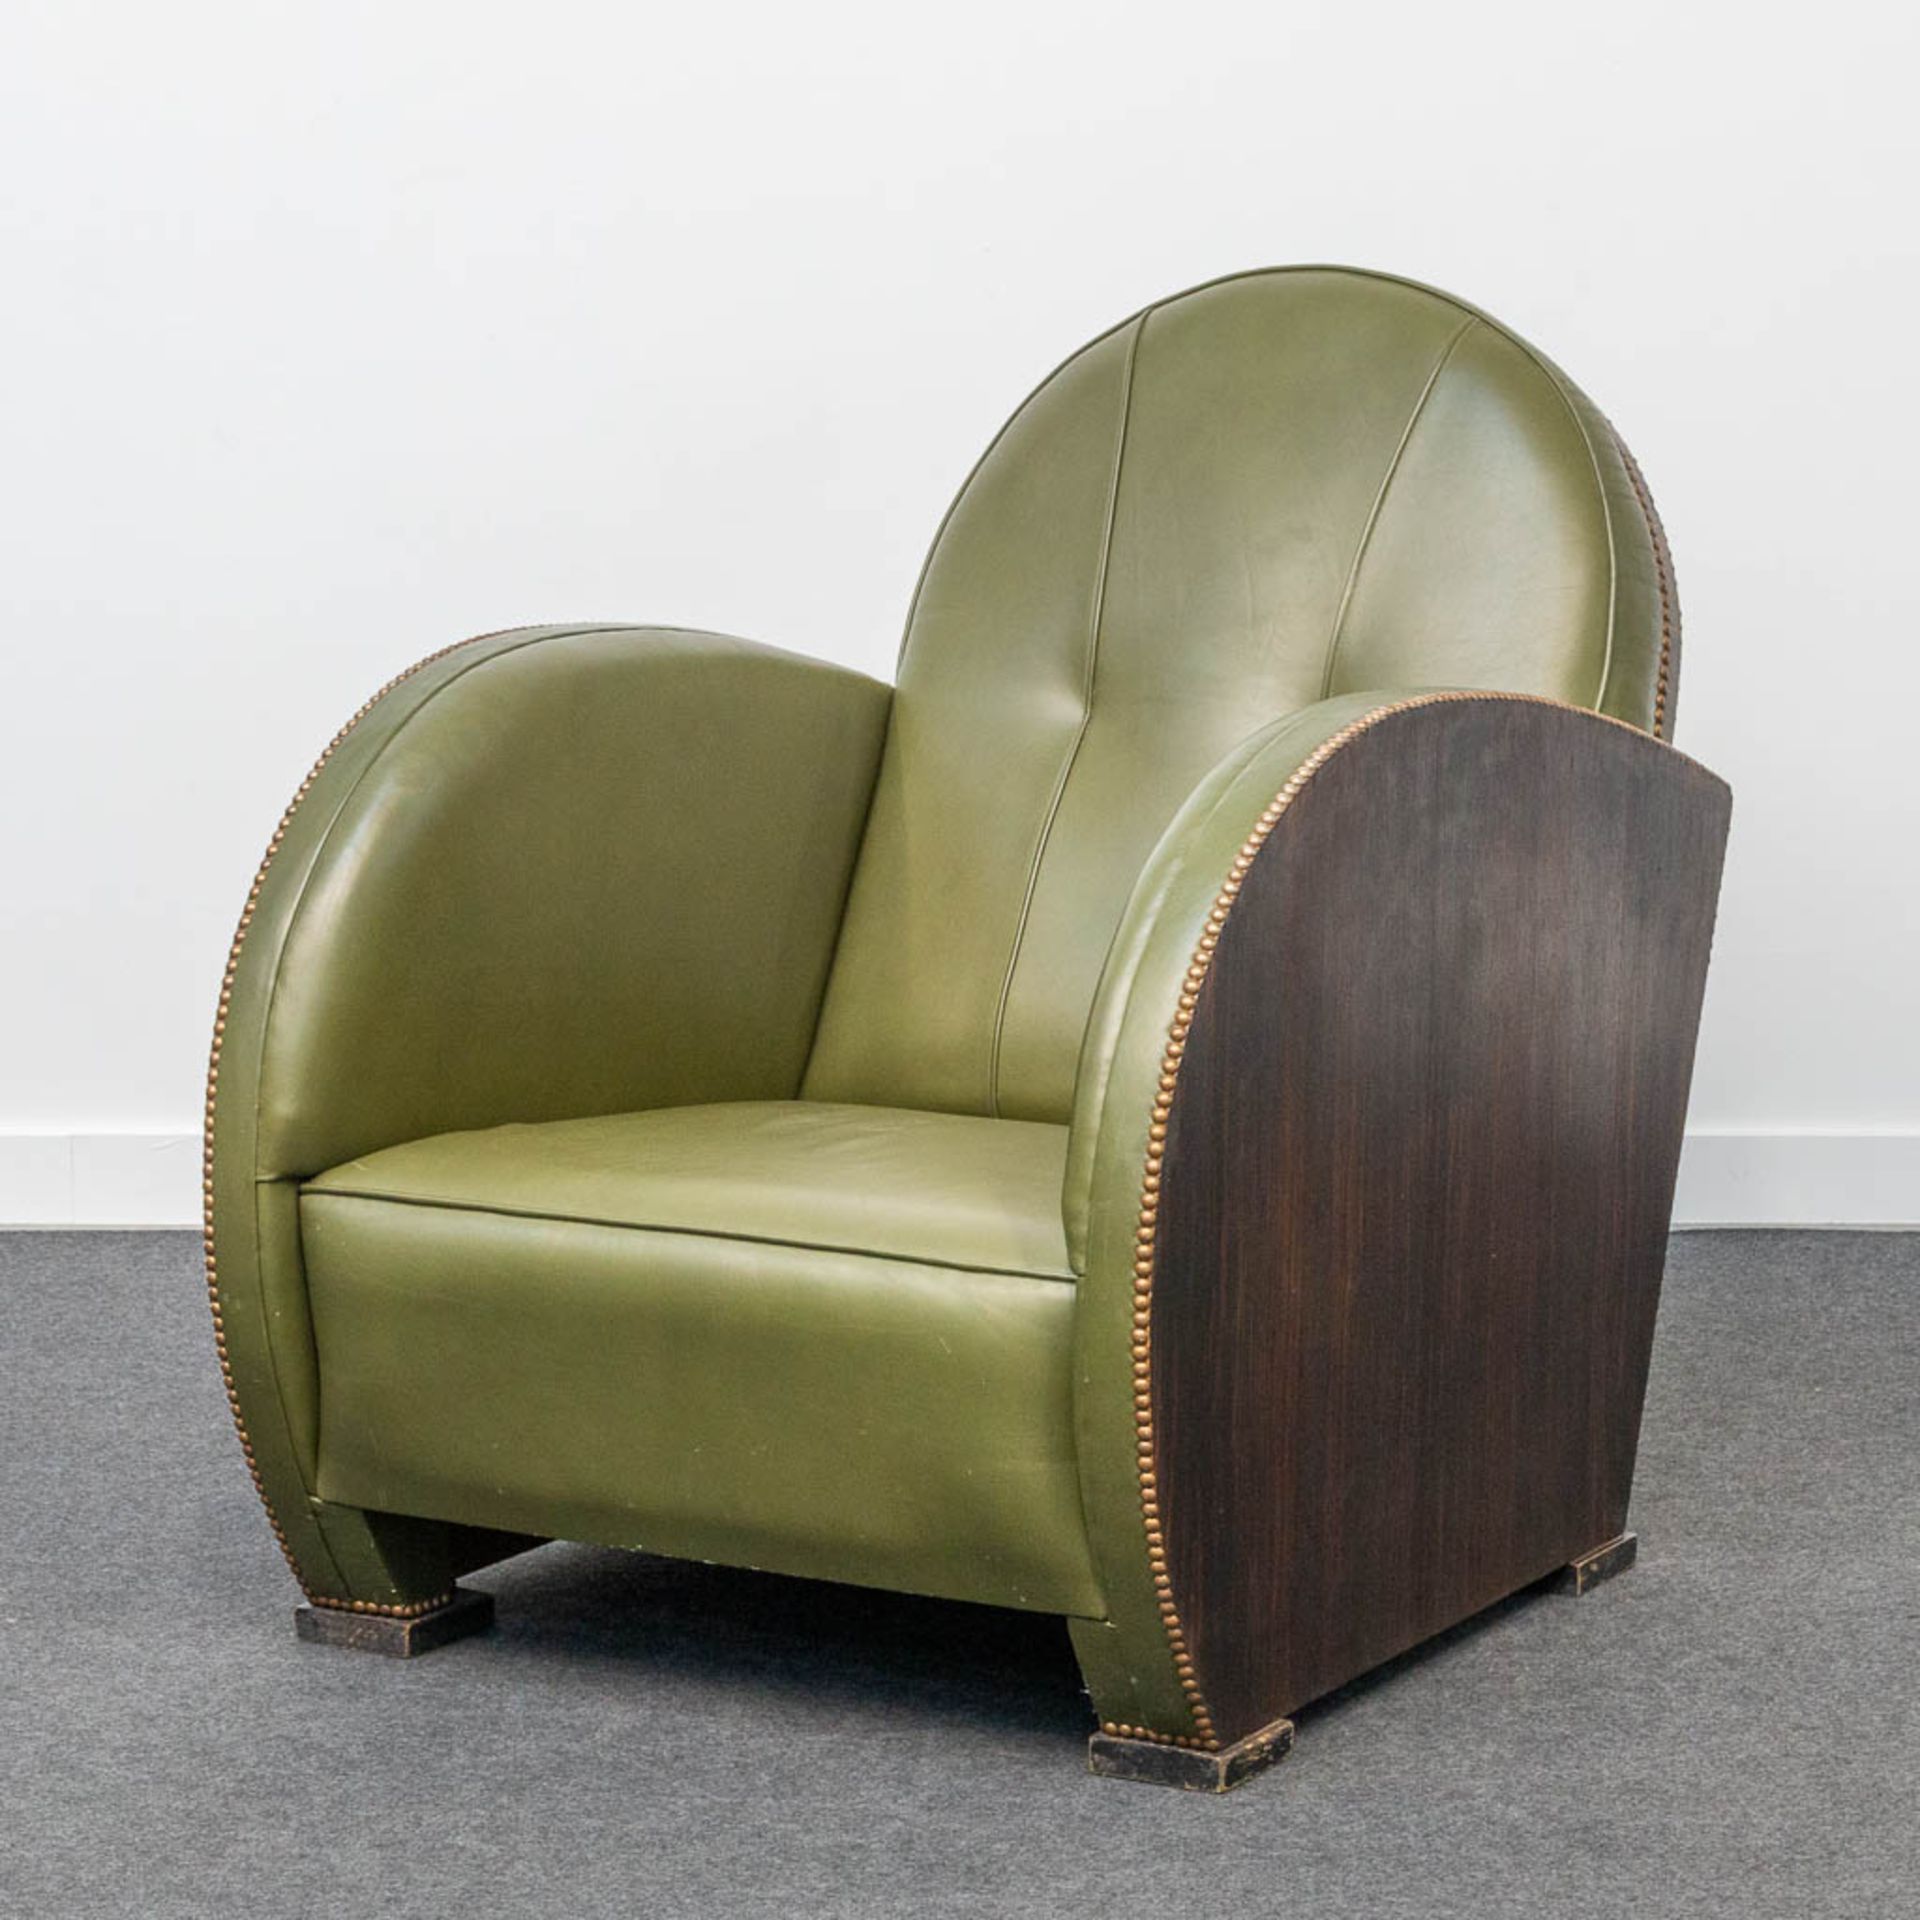 An armchair, upholstered with leather and with wood sides, art deco style.